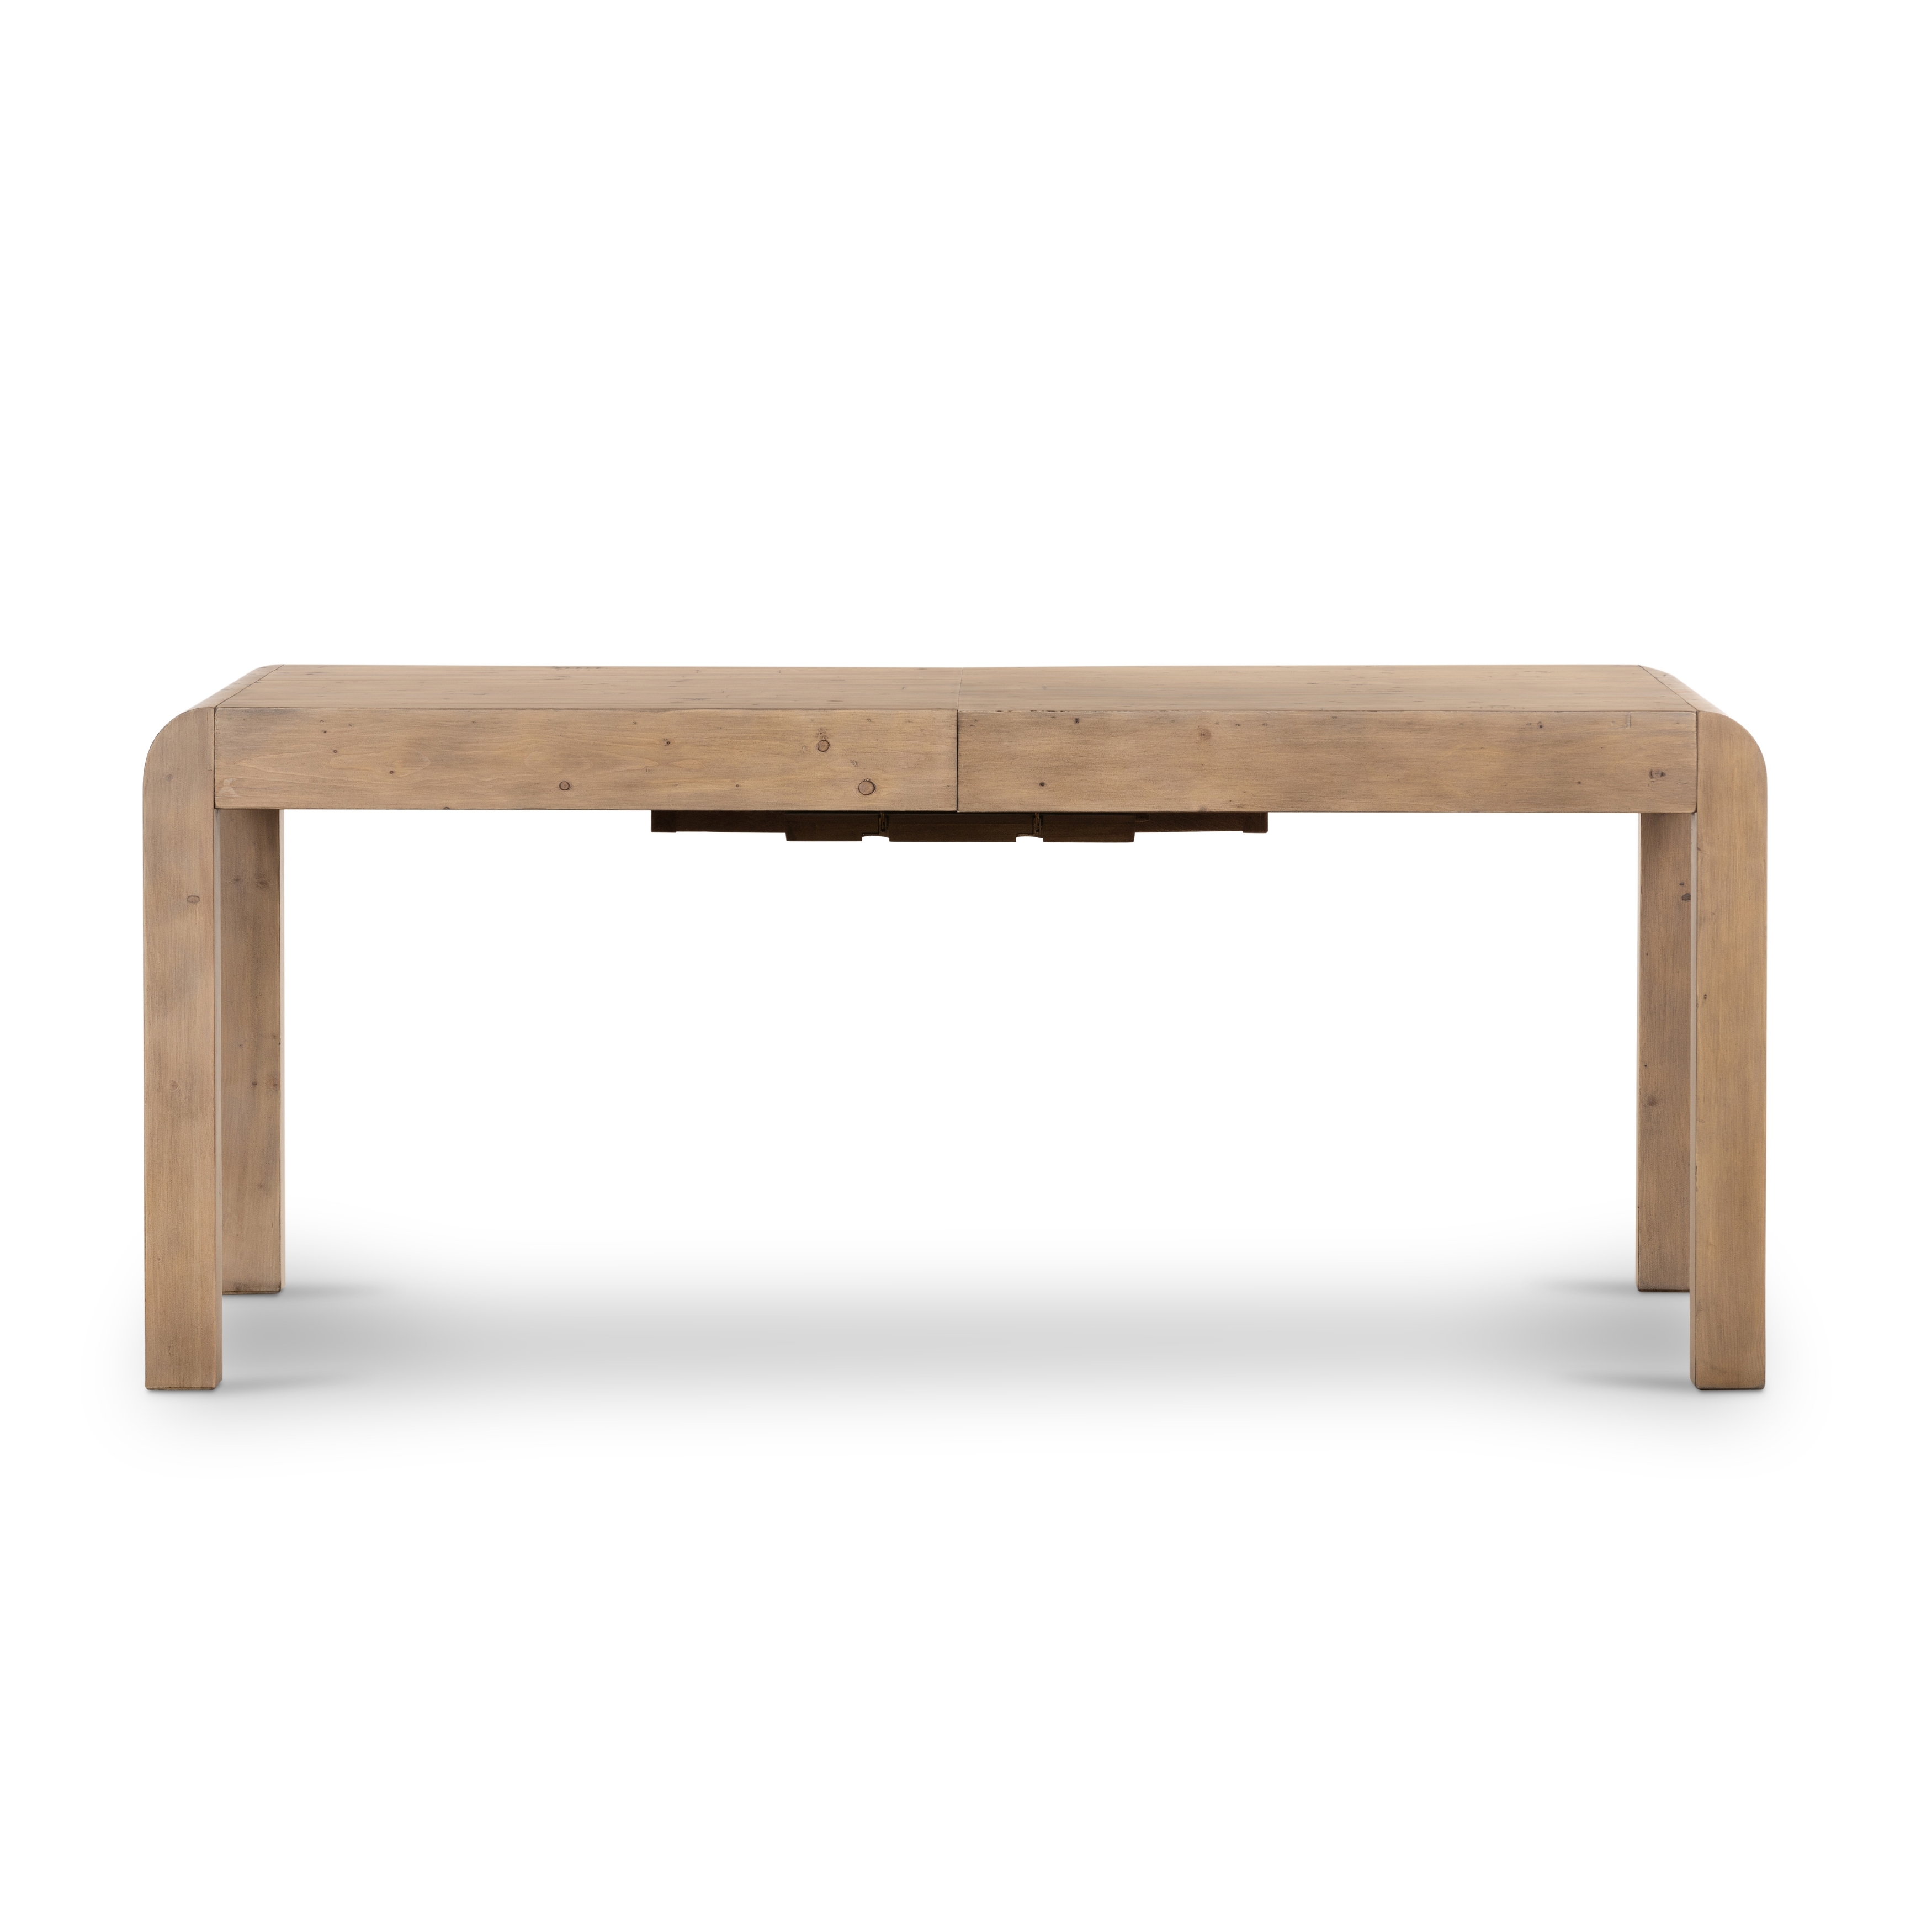 Everson 71" Extension Dining Table-Teak - Image 8